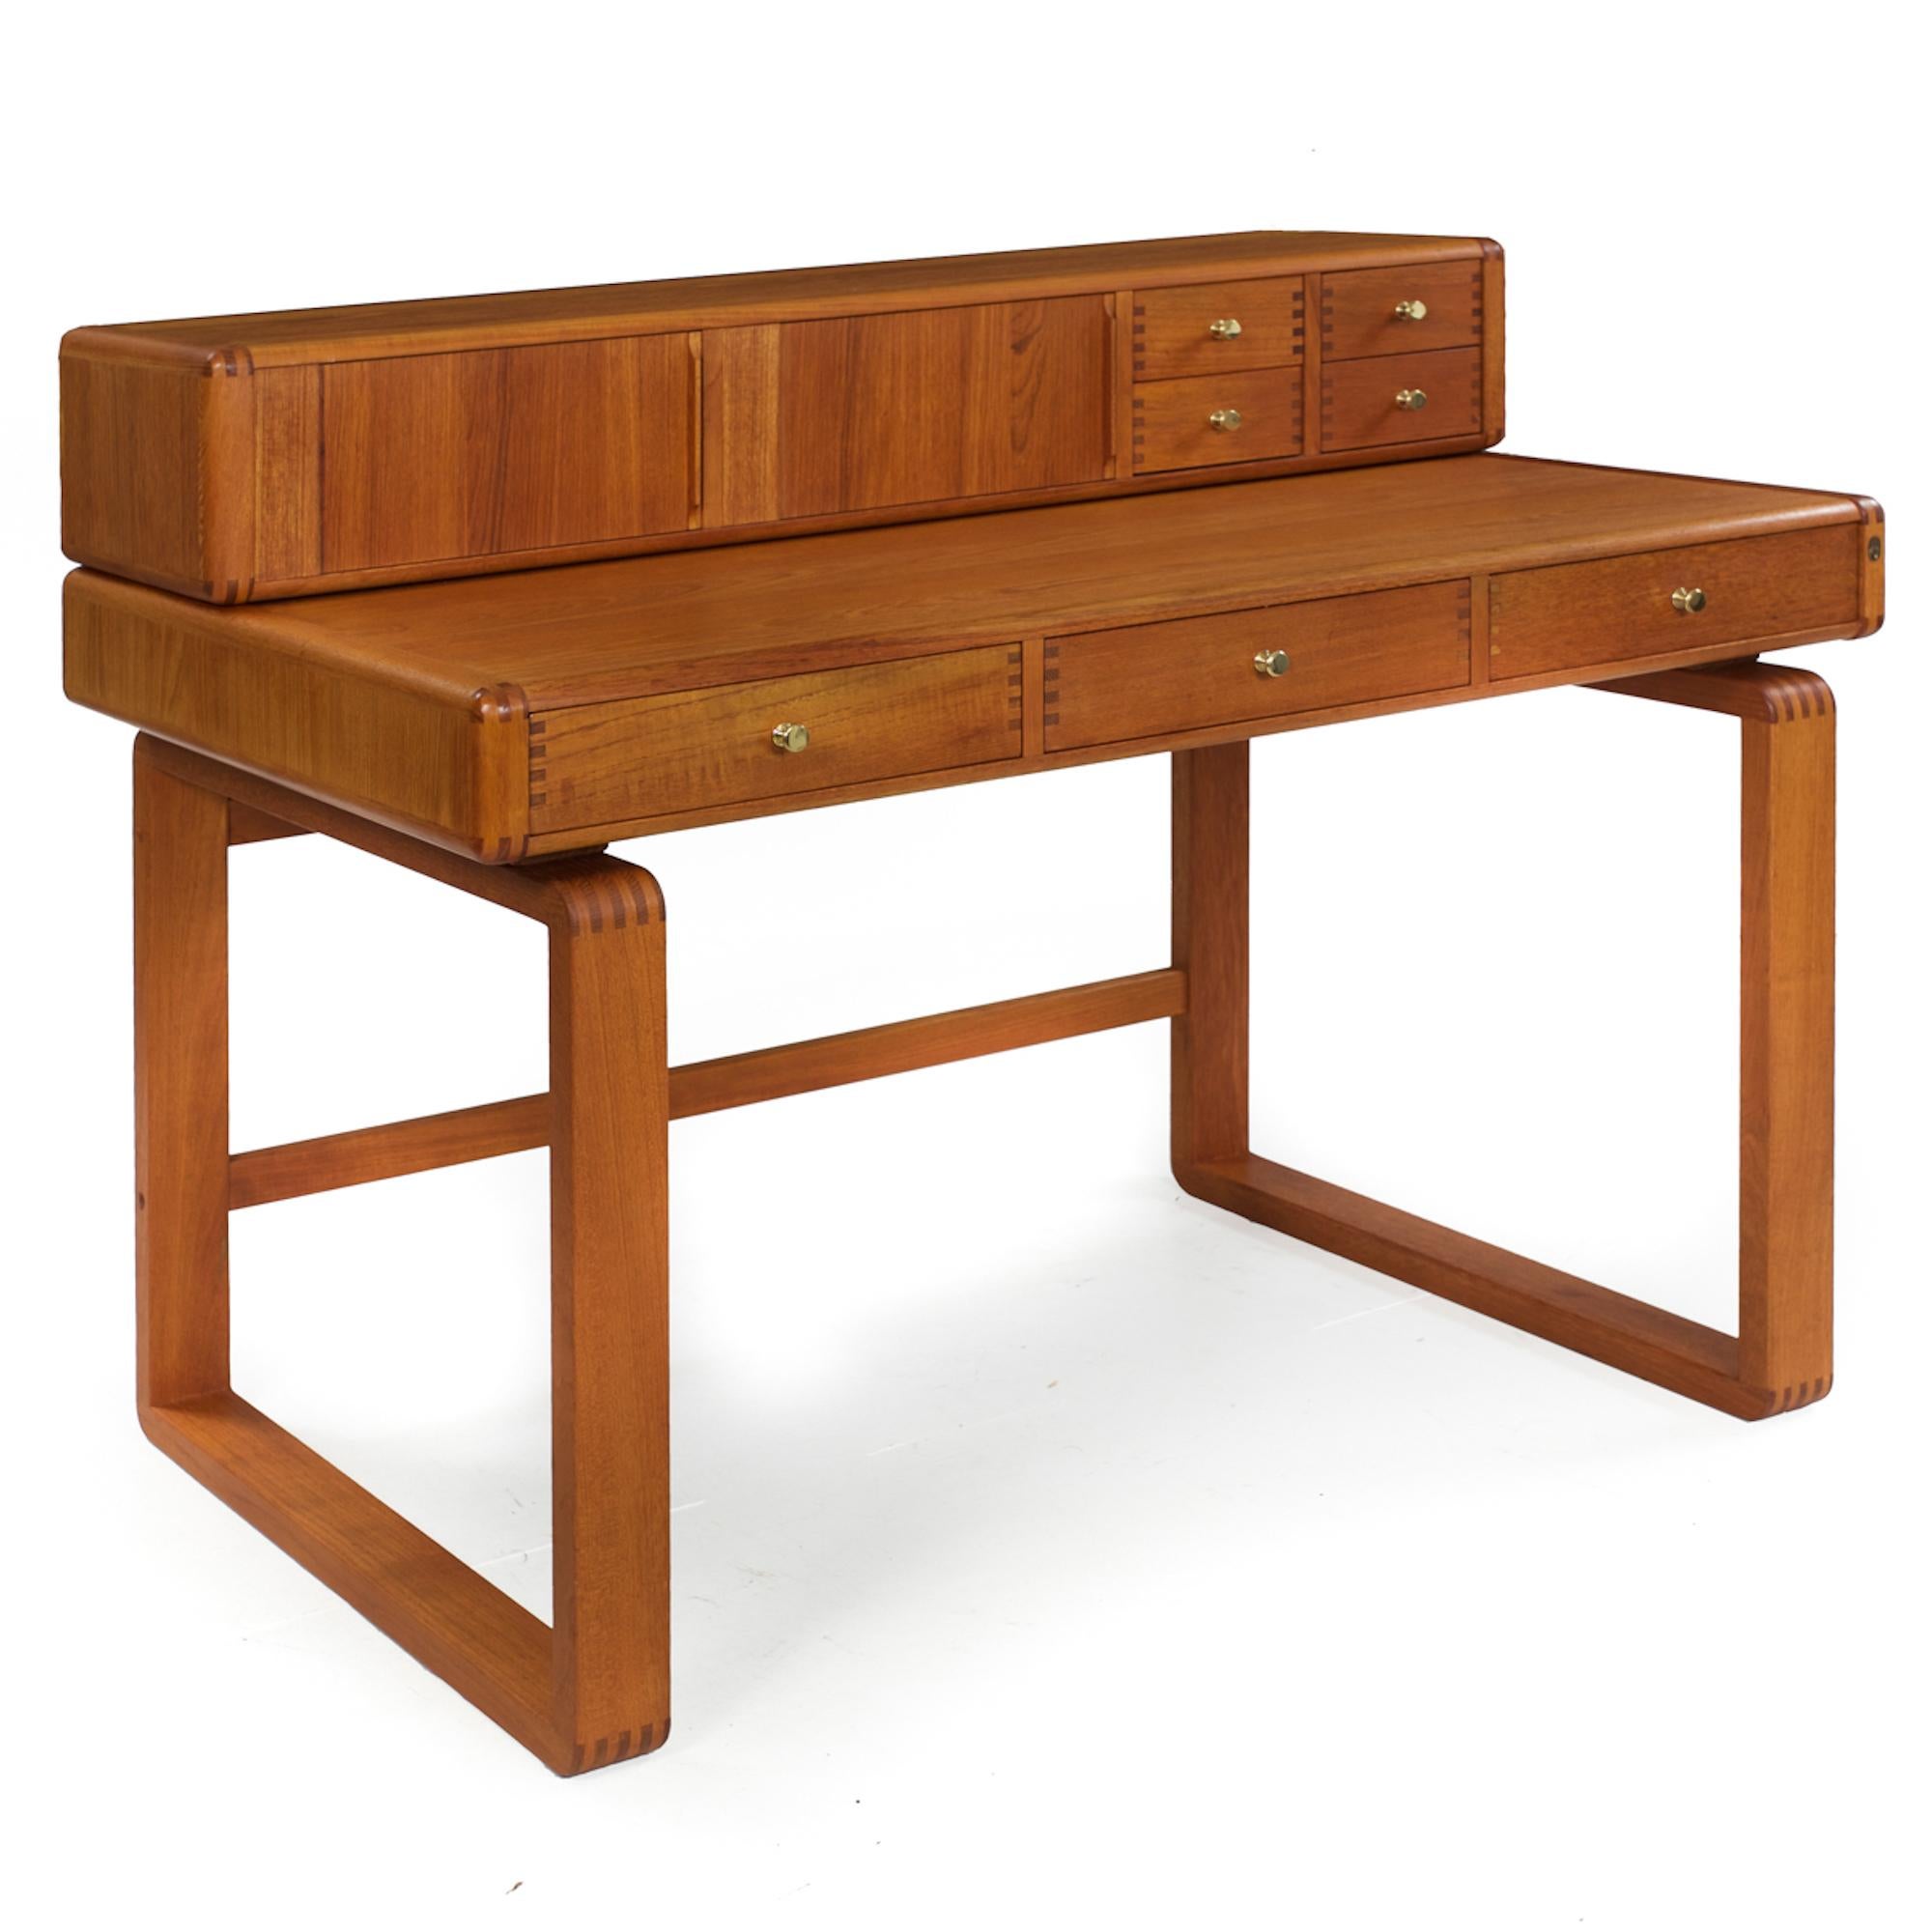 A very nice two-piece solid teak desk by D-Scan, it is crafted in two entirely separate units out of solid teak and teak veneers. The heavy finger-joint corners make for an incredibly solid construction. The top features tambour doors, the left door